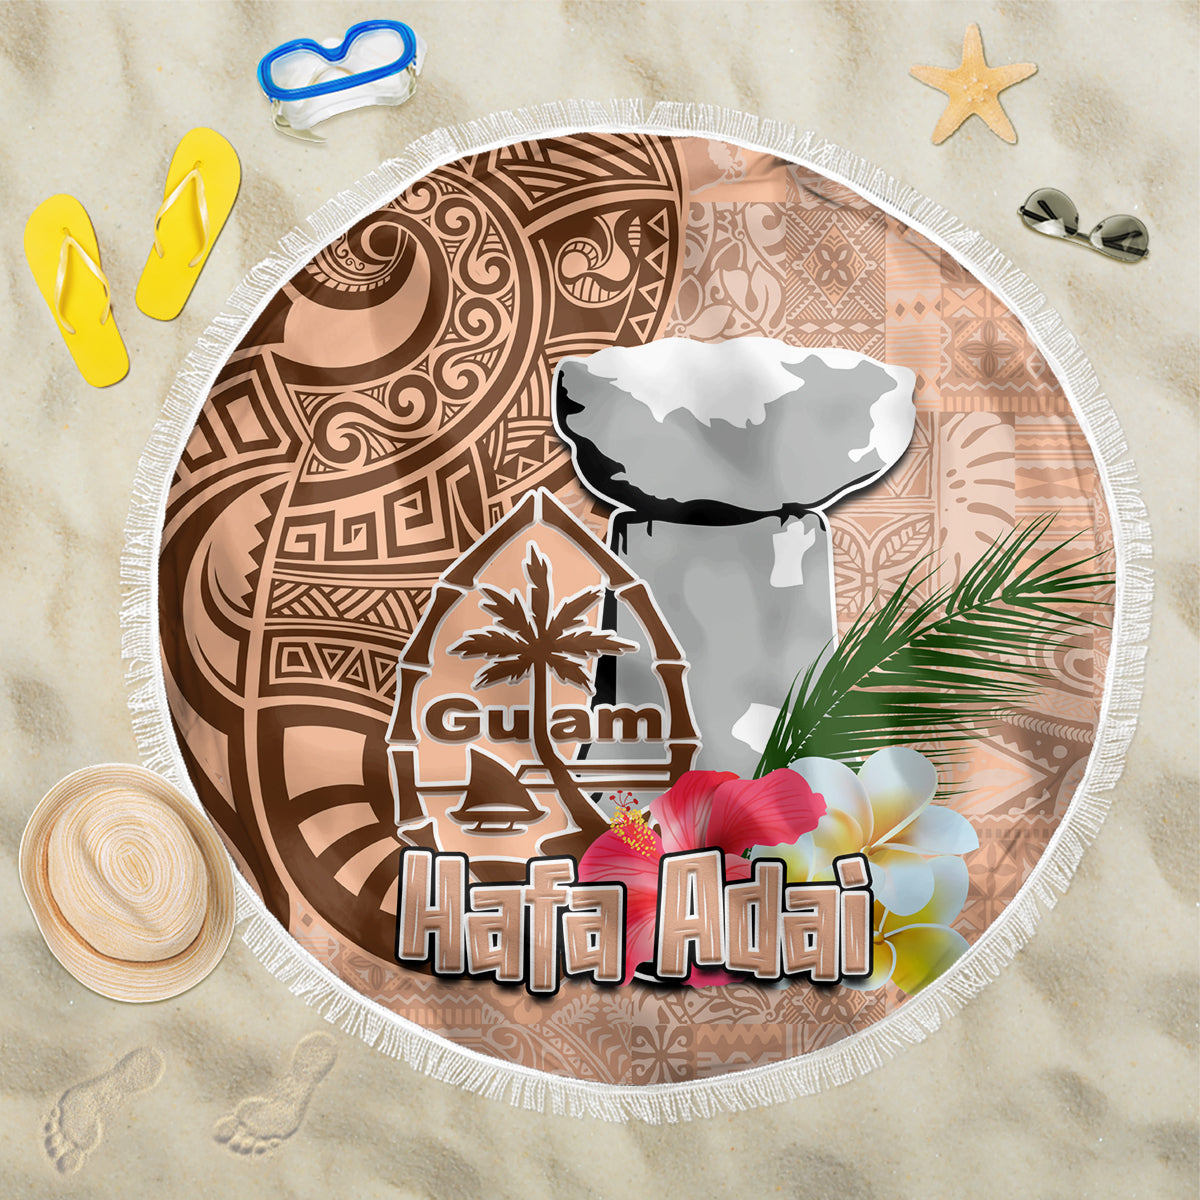 Guam Seal and Latte Stone With Ethnic Tapa Pattern Beach Blanket Peach Fuzz Color LT03 One Size 150cm Peach Fuzz - Polynesian Pride